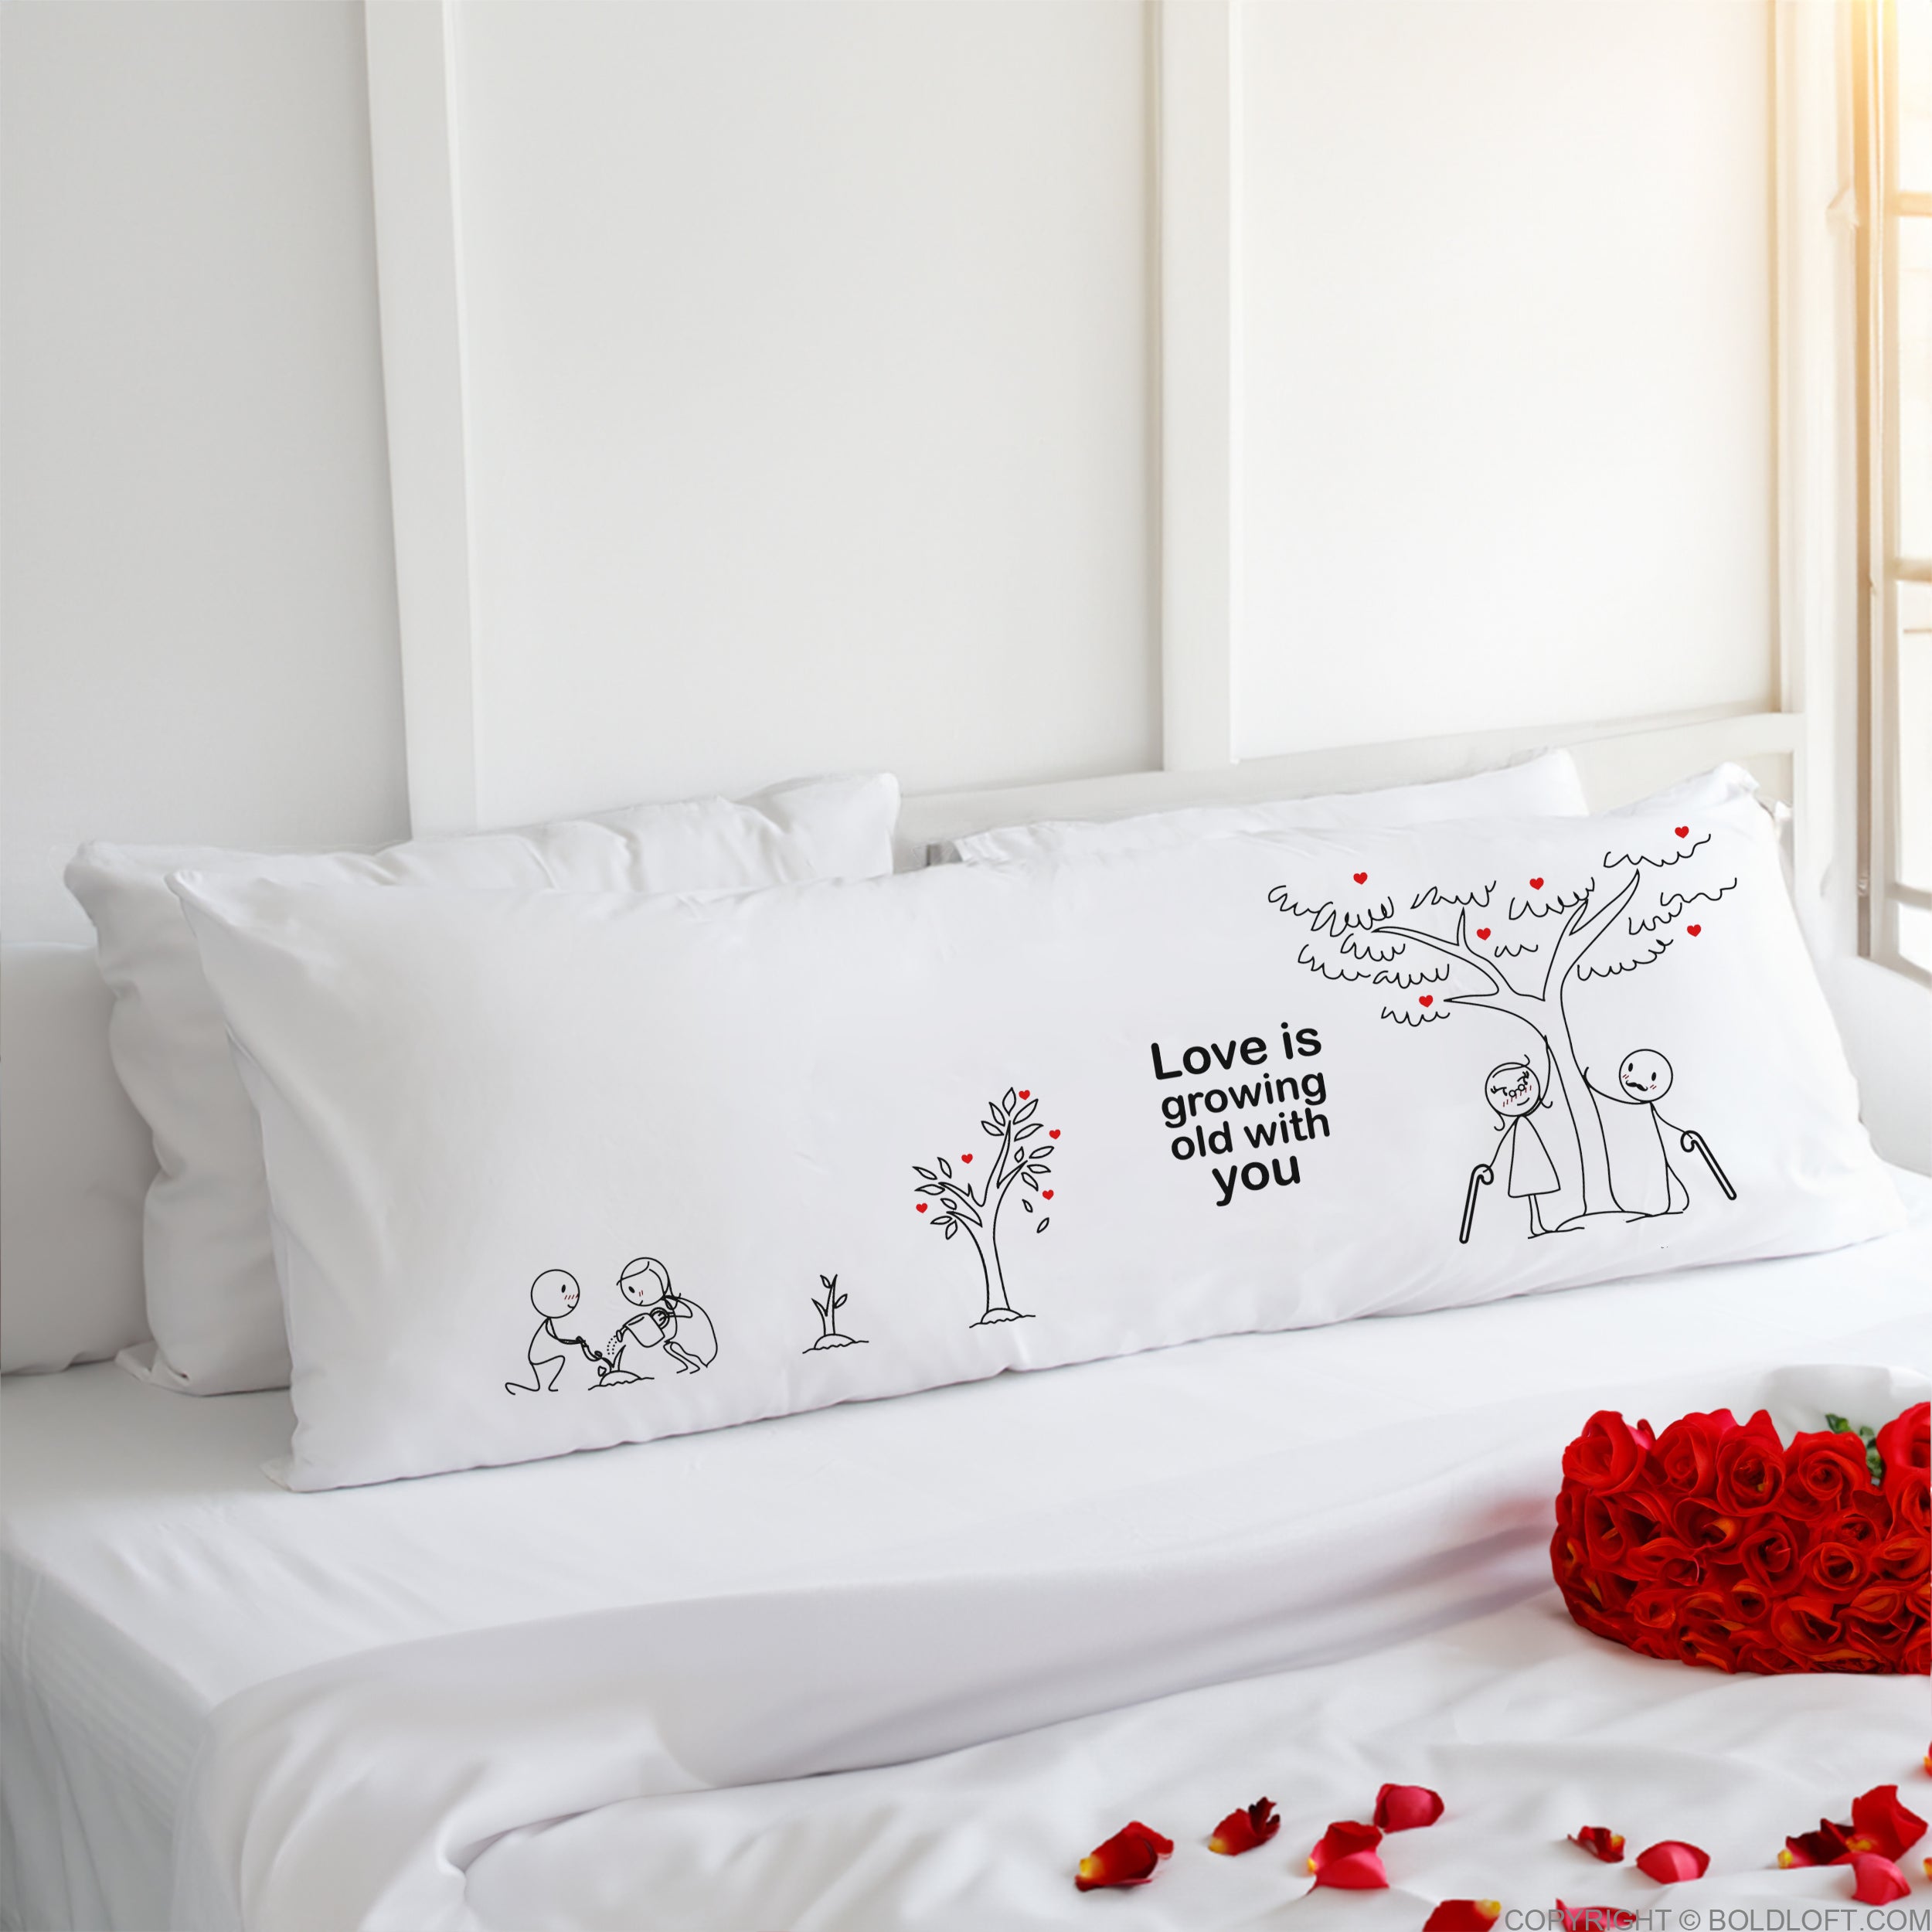 BoldLoft Grow Old with You® Body Pillowcase with heartwarming design, make it a perfect cotton anniversary gift for him and her.